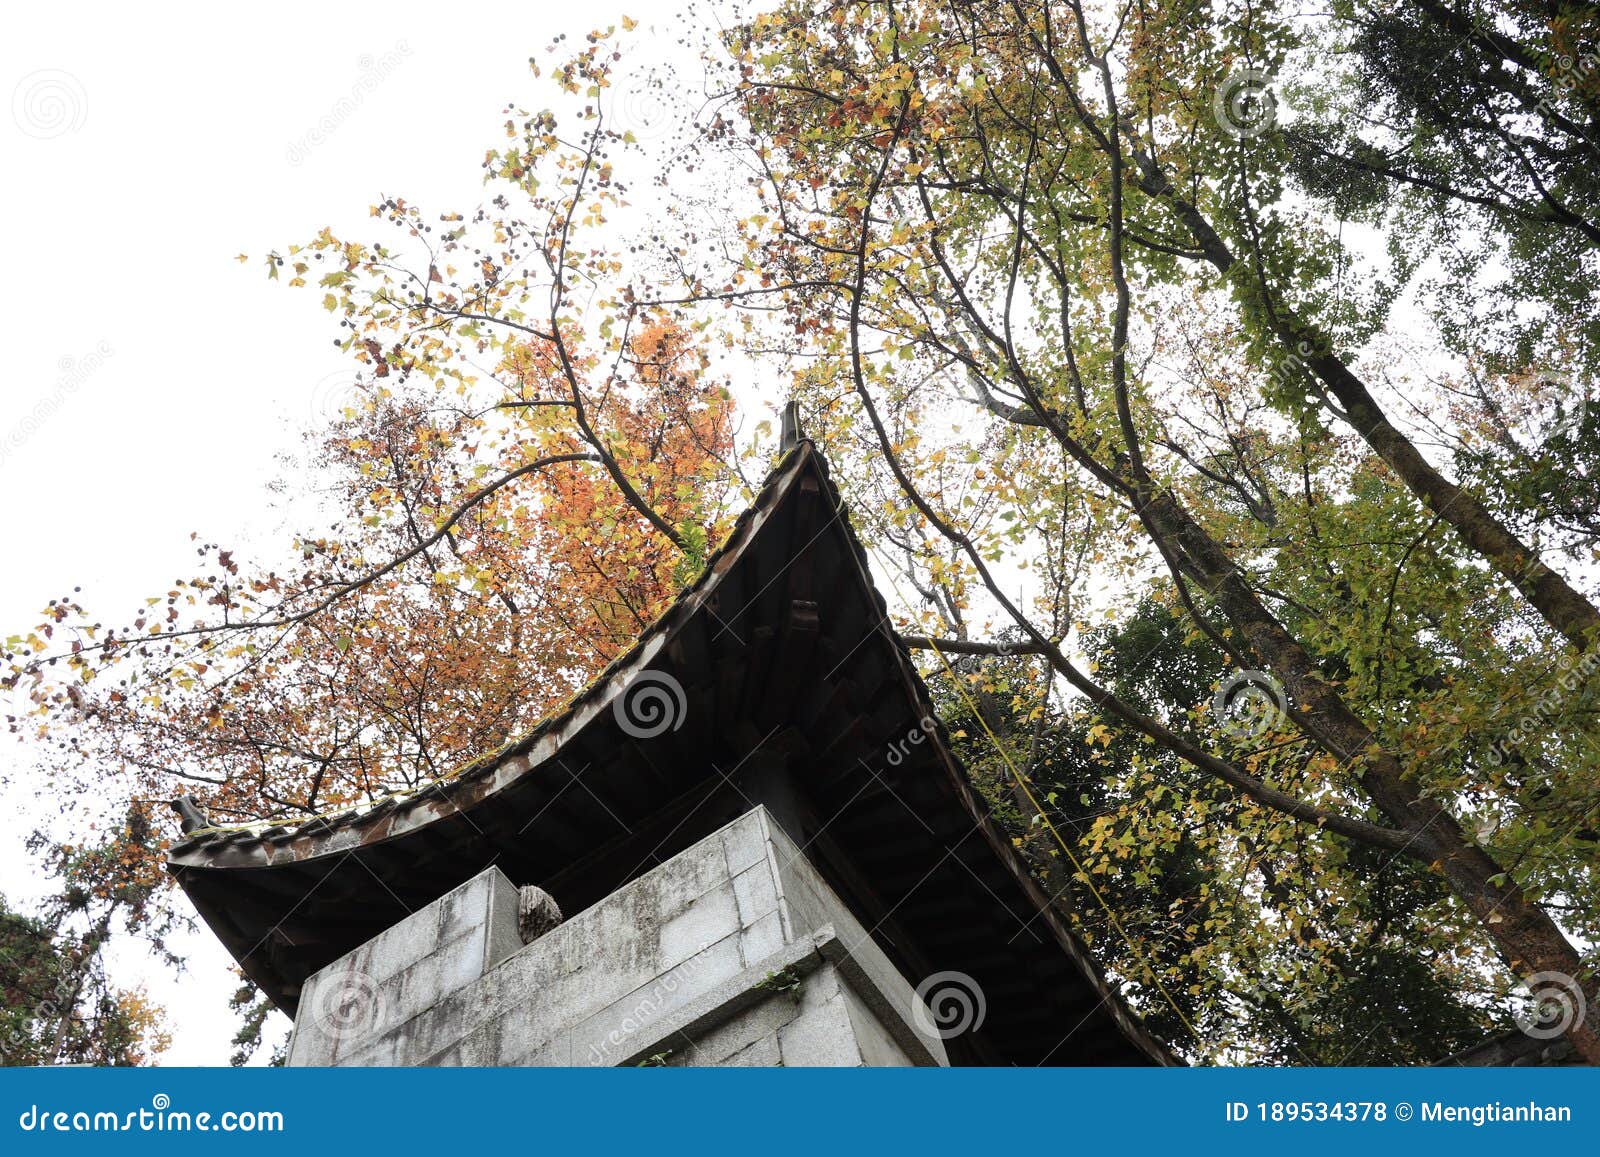 Overhanging Eaves 4-Chinese Temples Stock Photo - Image of mutual ...